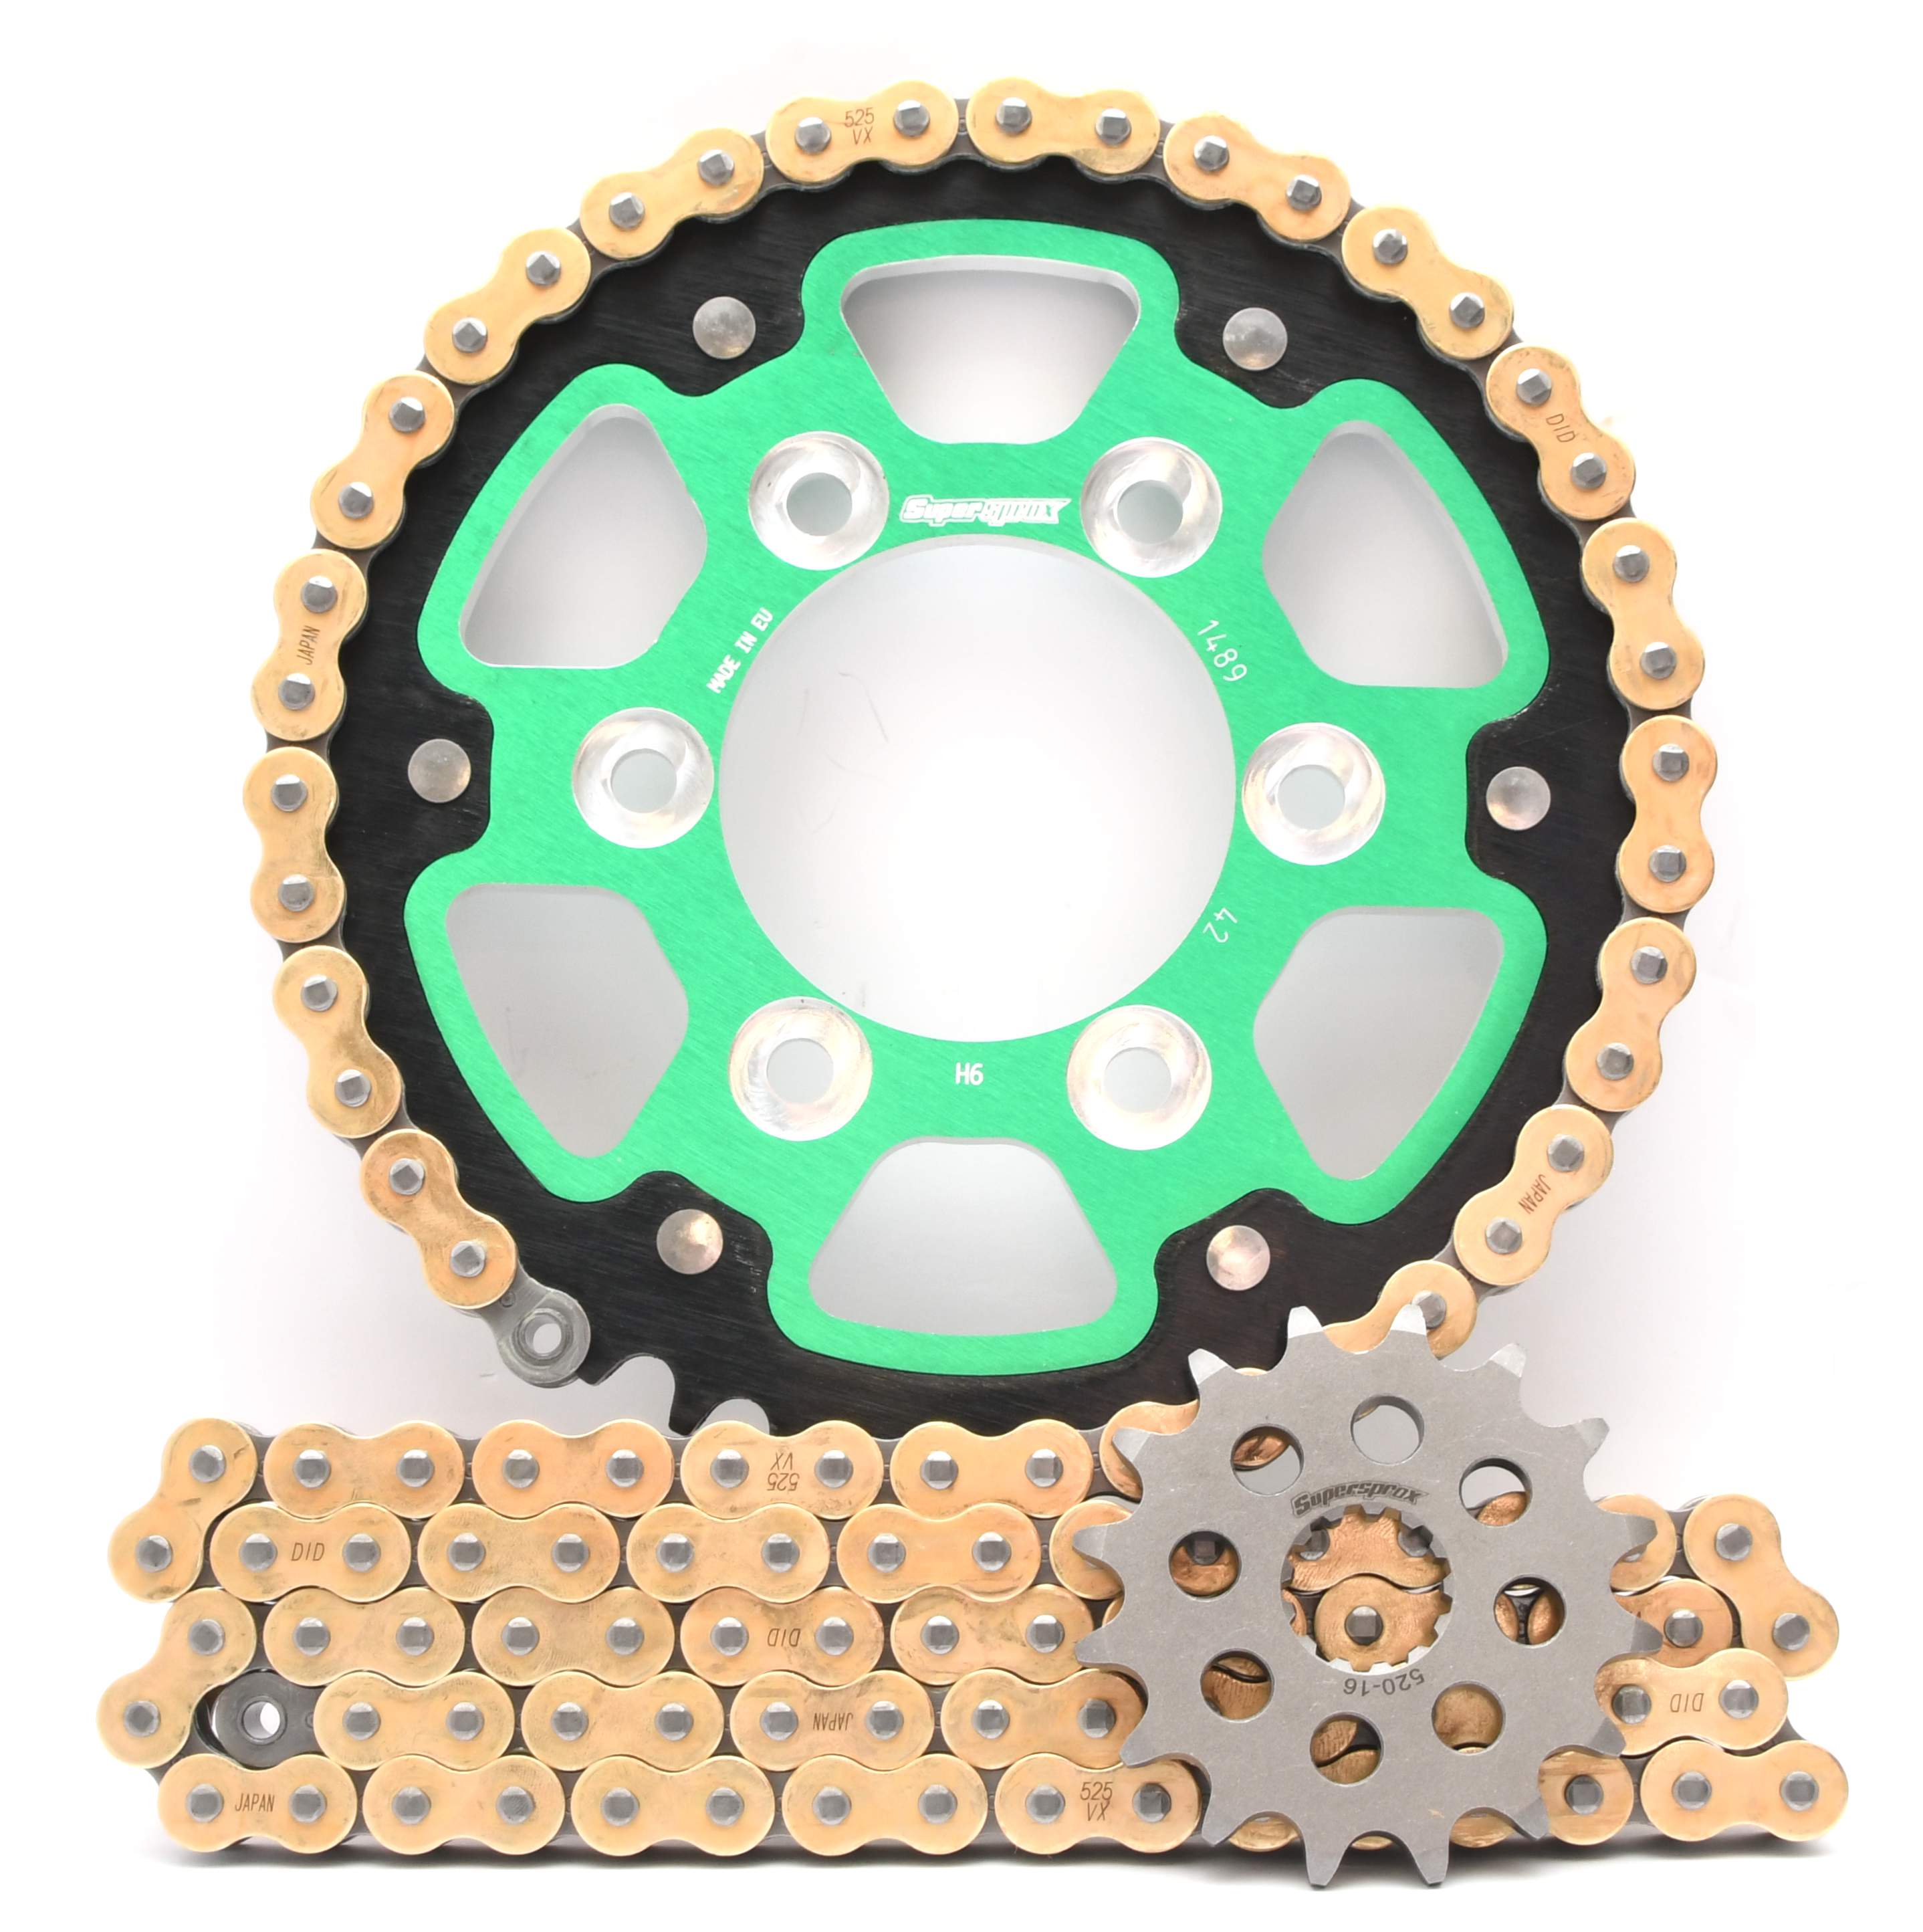 Supersprox Chain & Sprocket Kit for Kawasaki Z1000 - Choose Your Gearing - 0